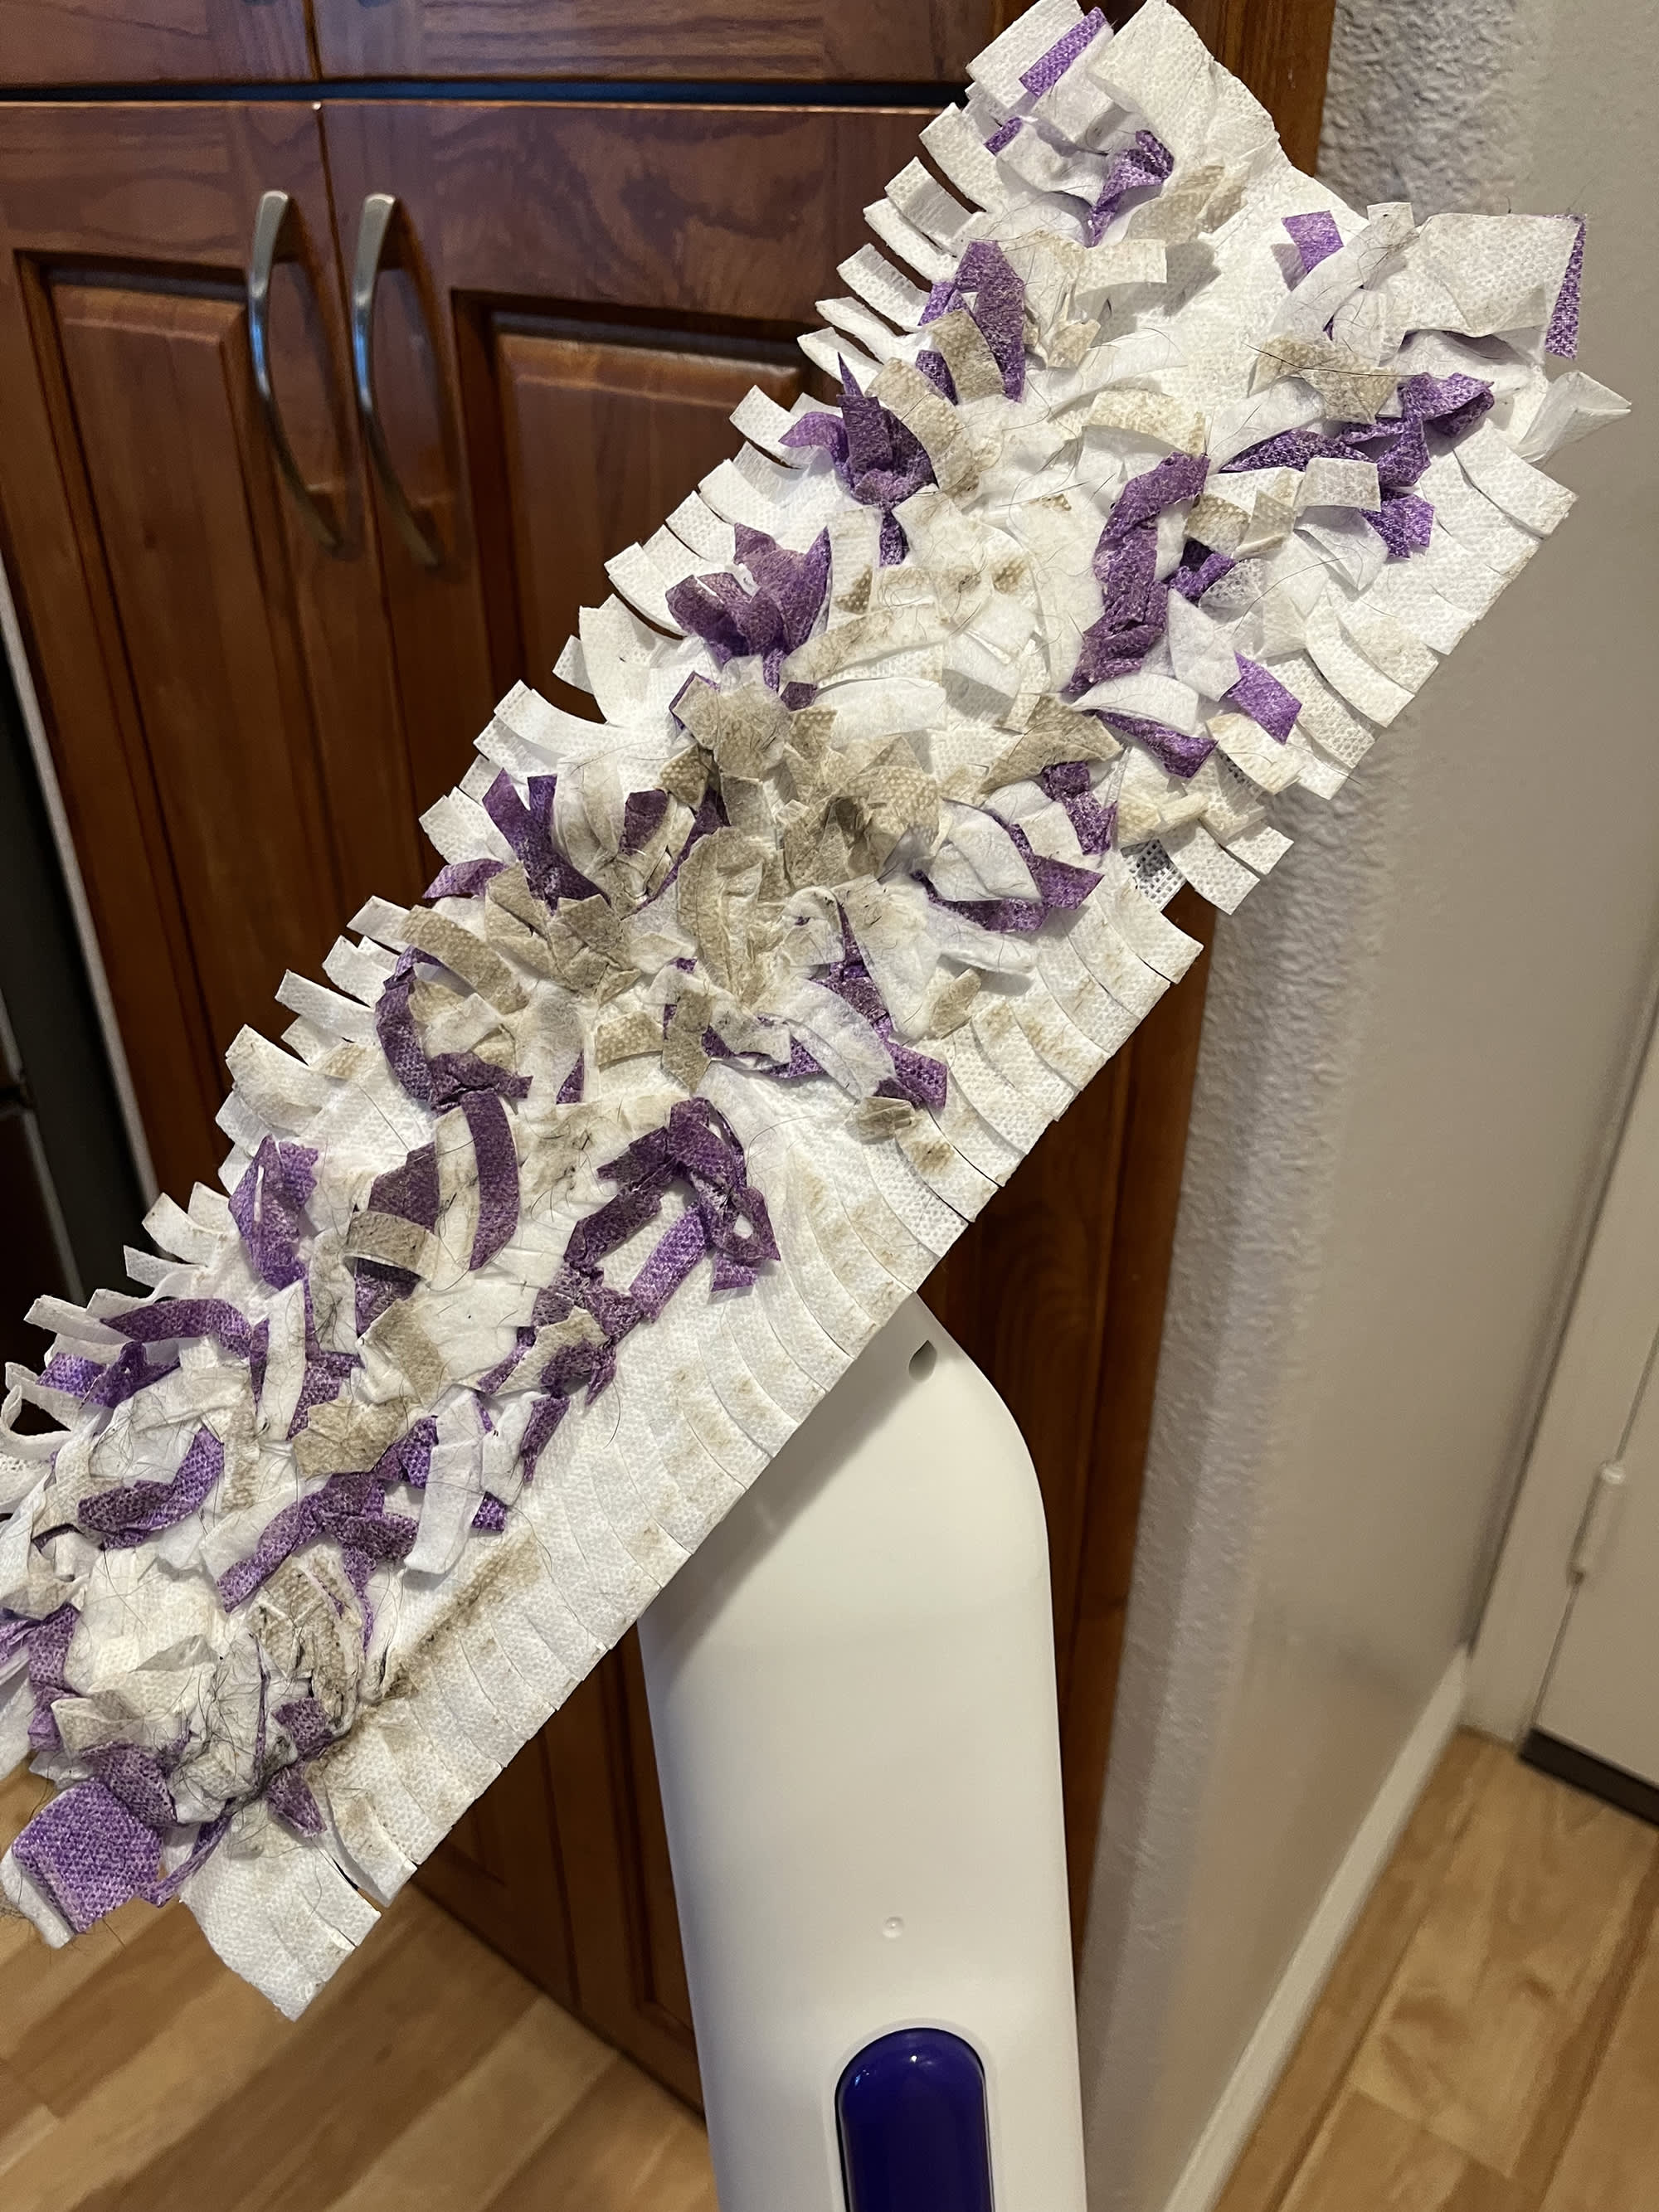 Swiffer PowerMop Tested & Reviewed — with Photos